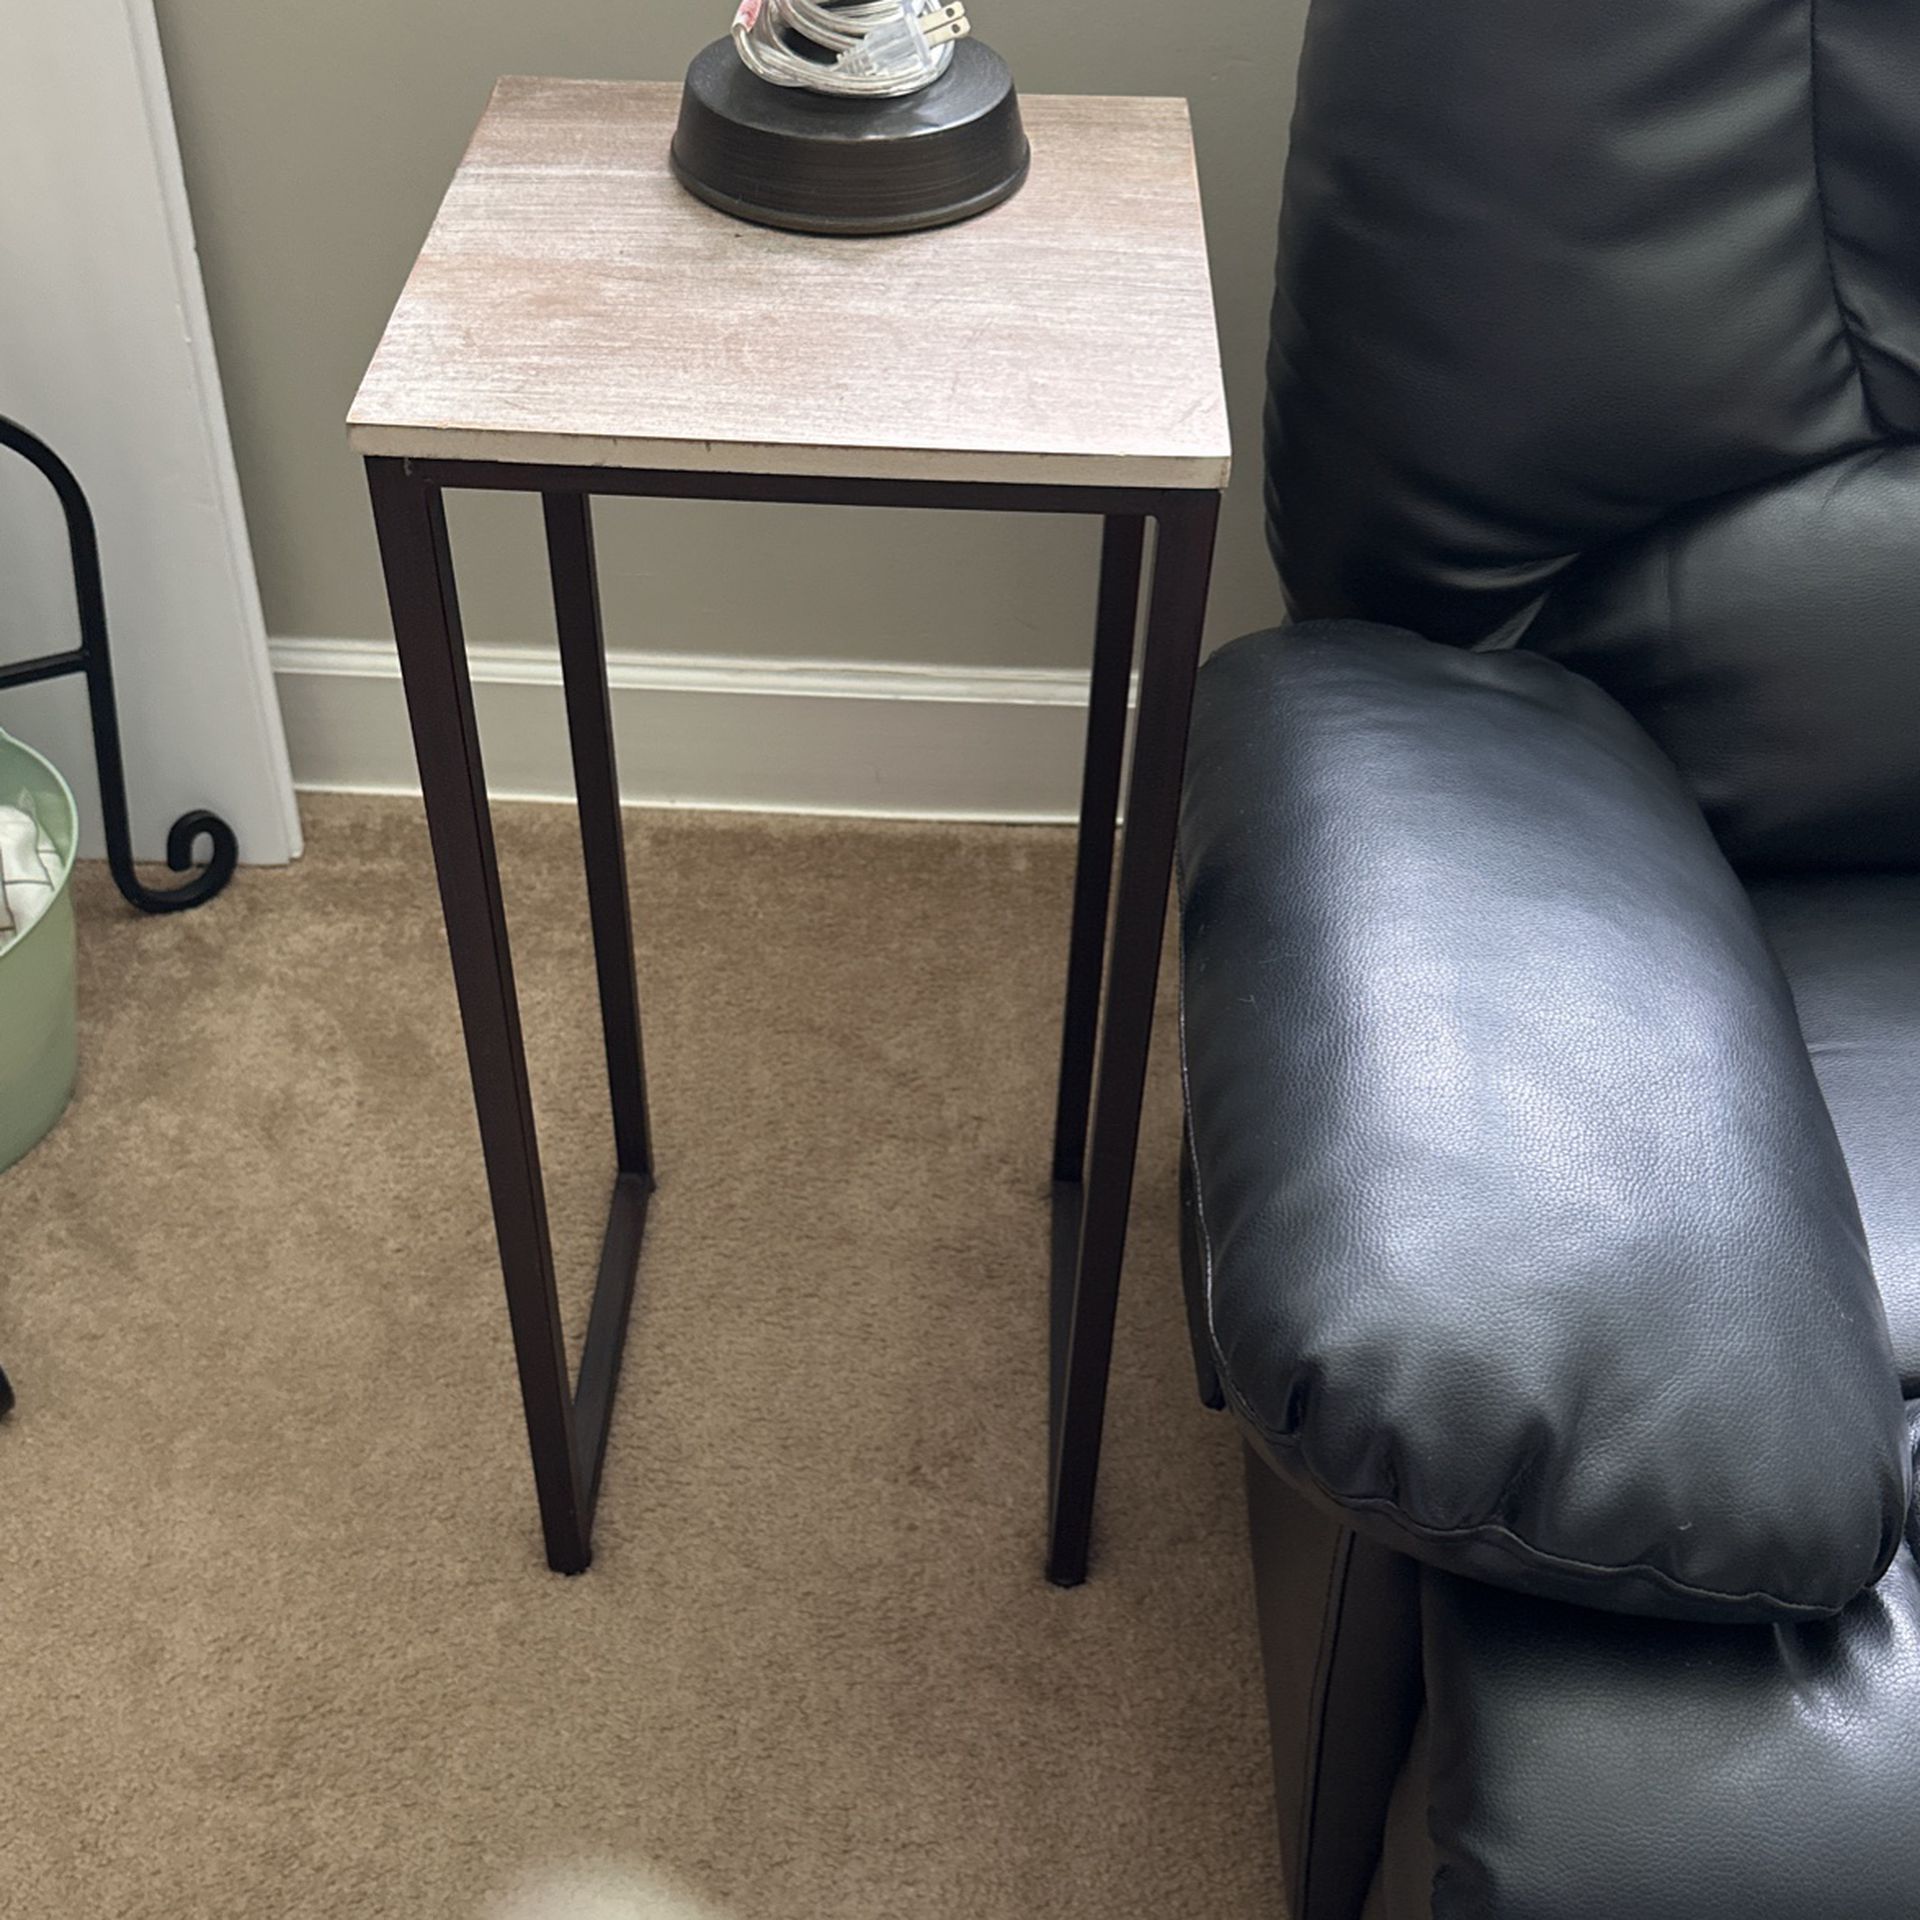 2 In Tables Of The Same Metal Bottom With Wood Top.